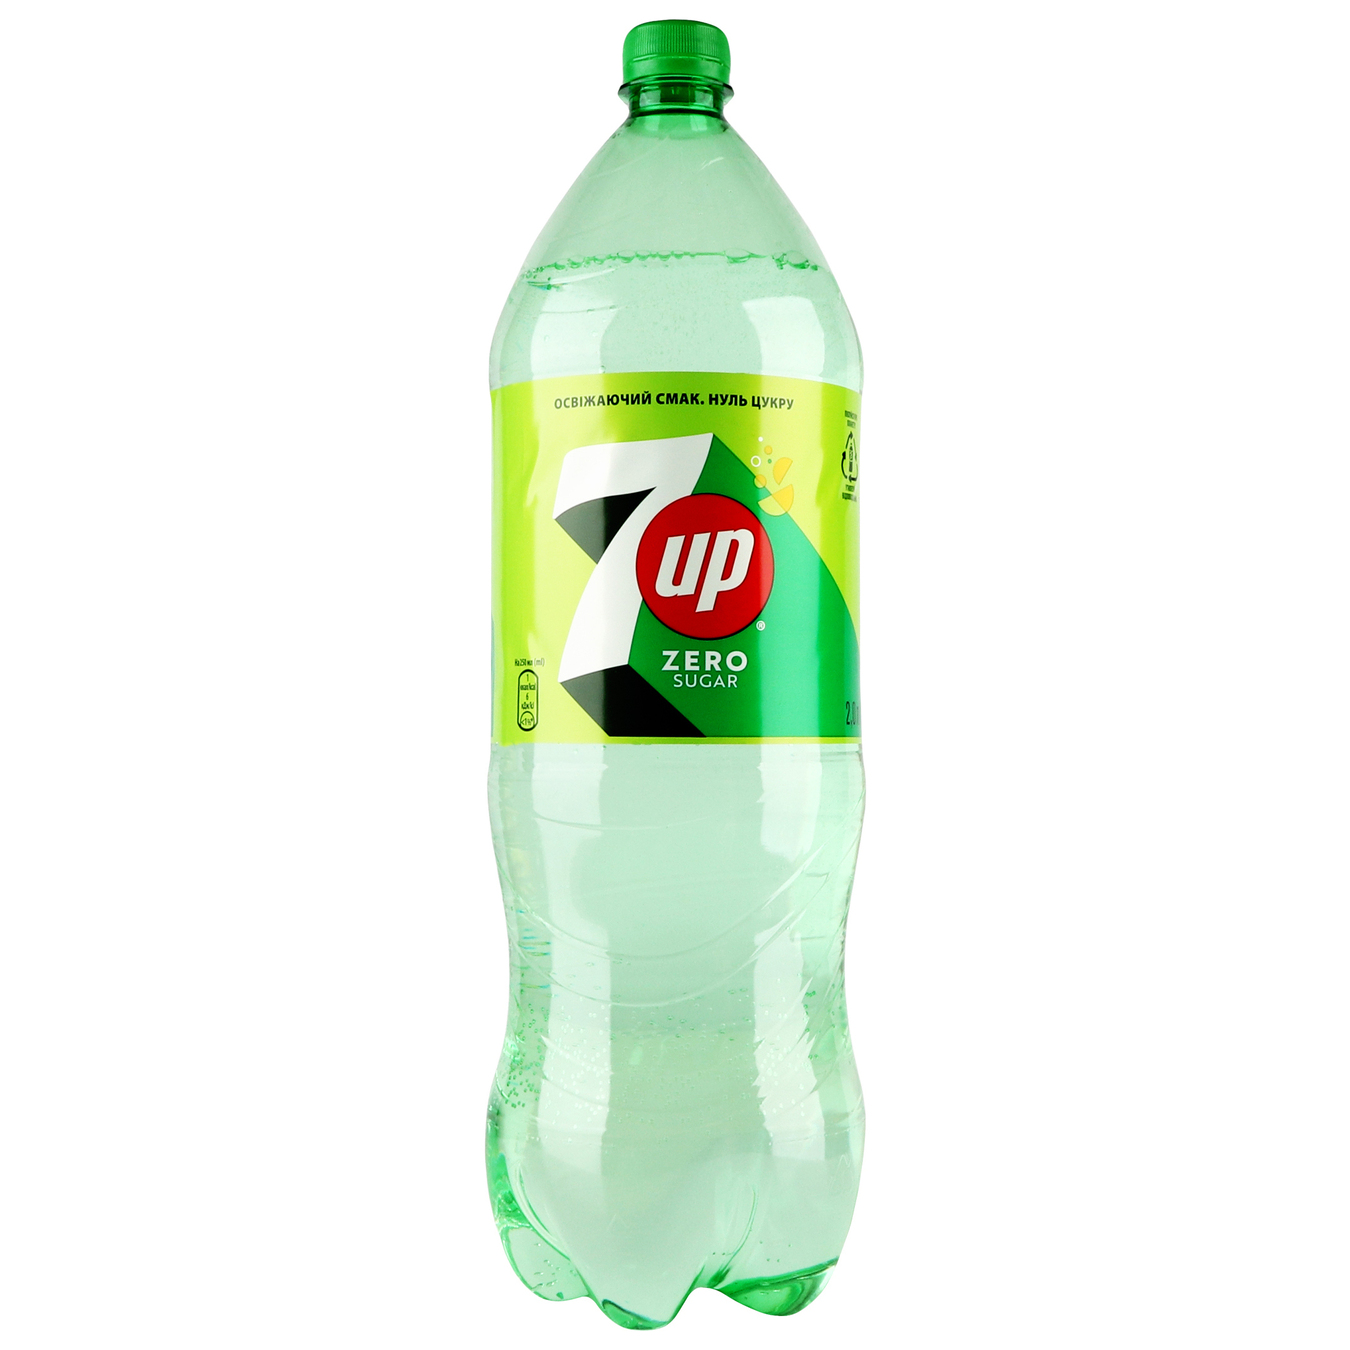  Carbonated drink 7 UP Free 2 l